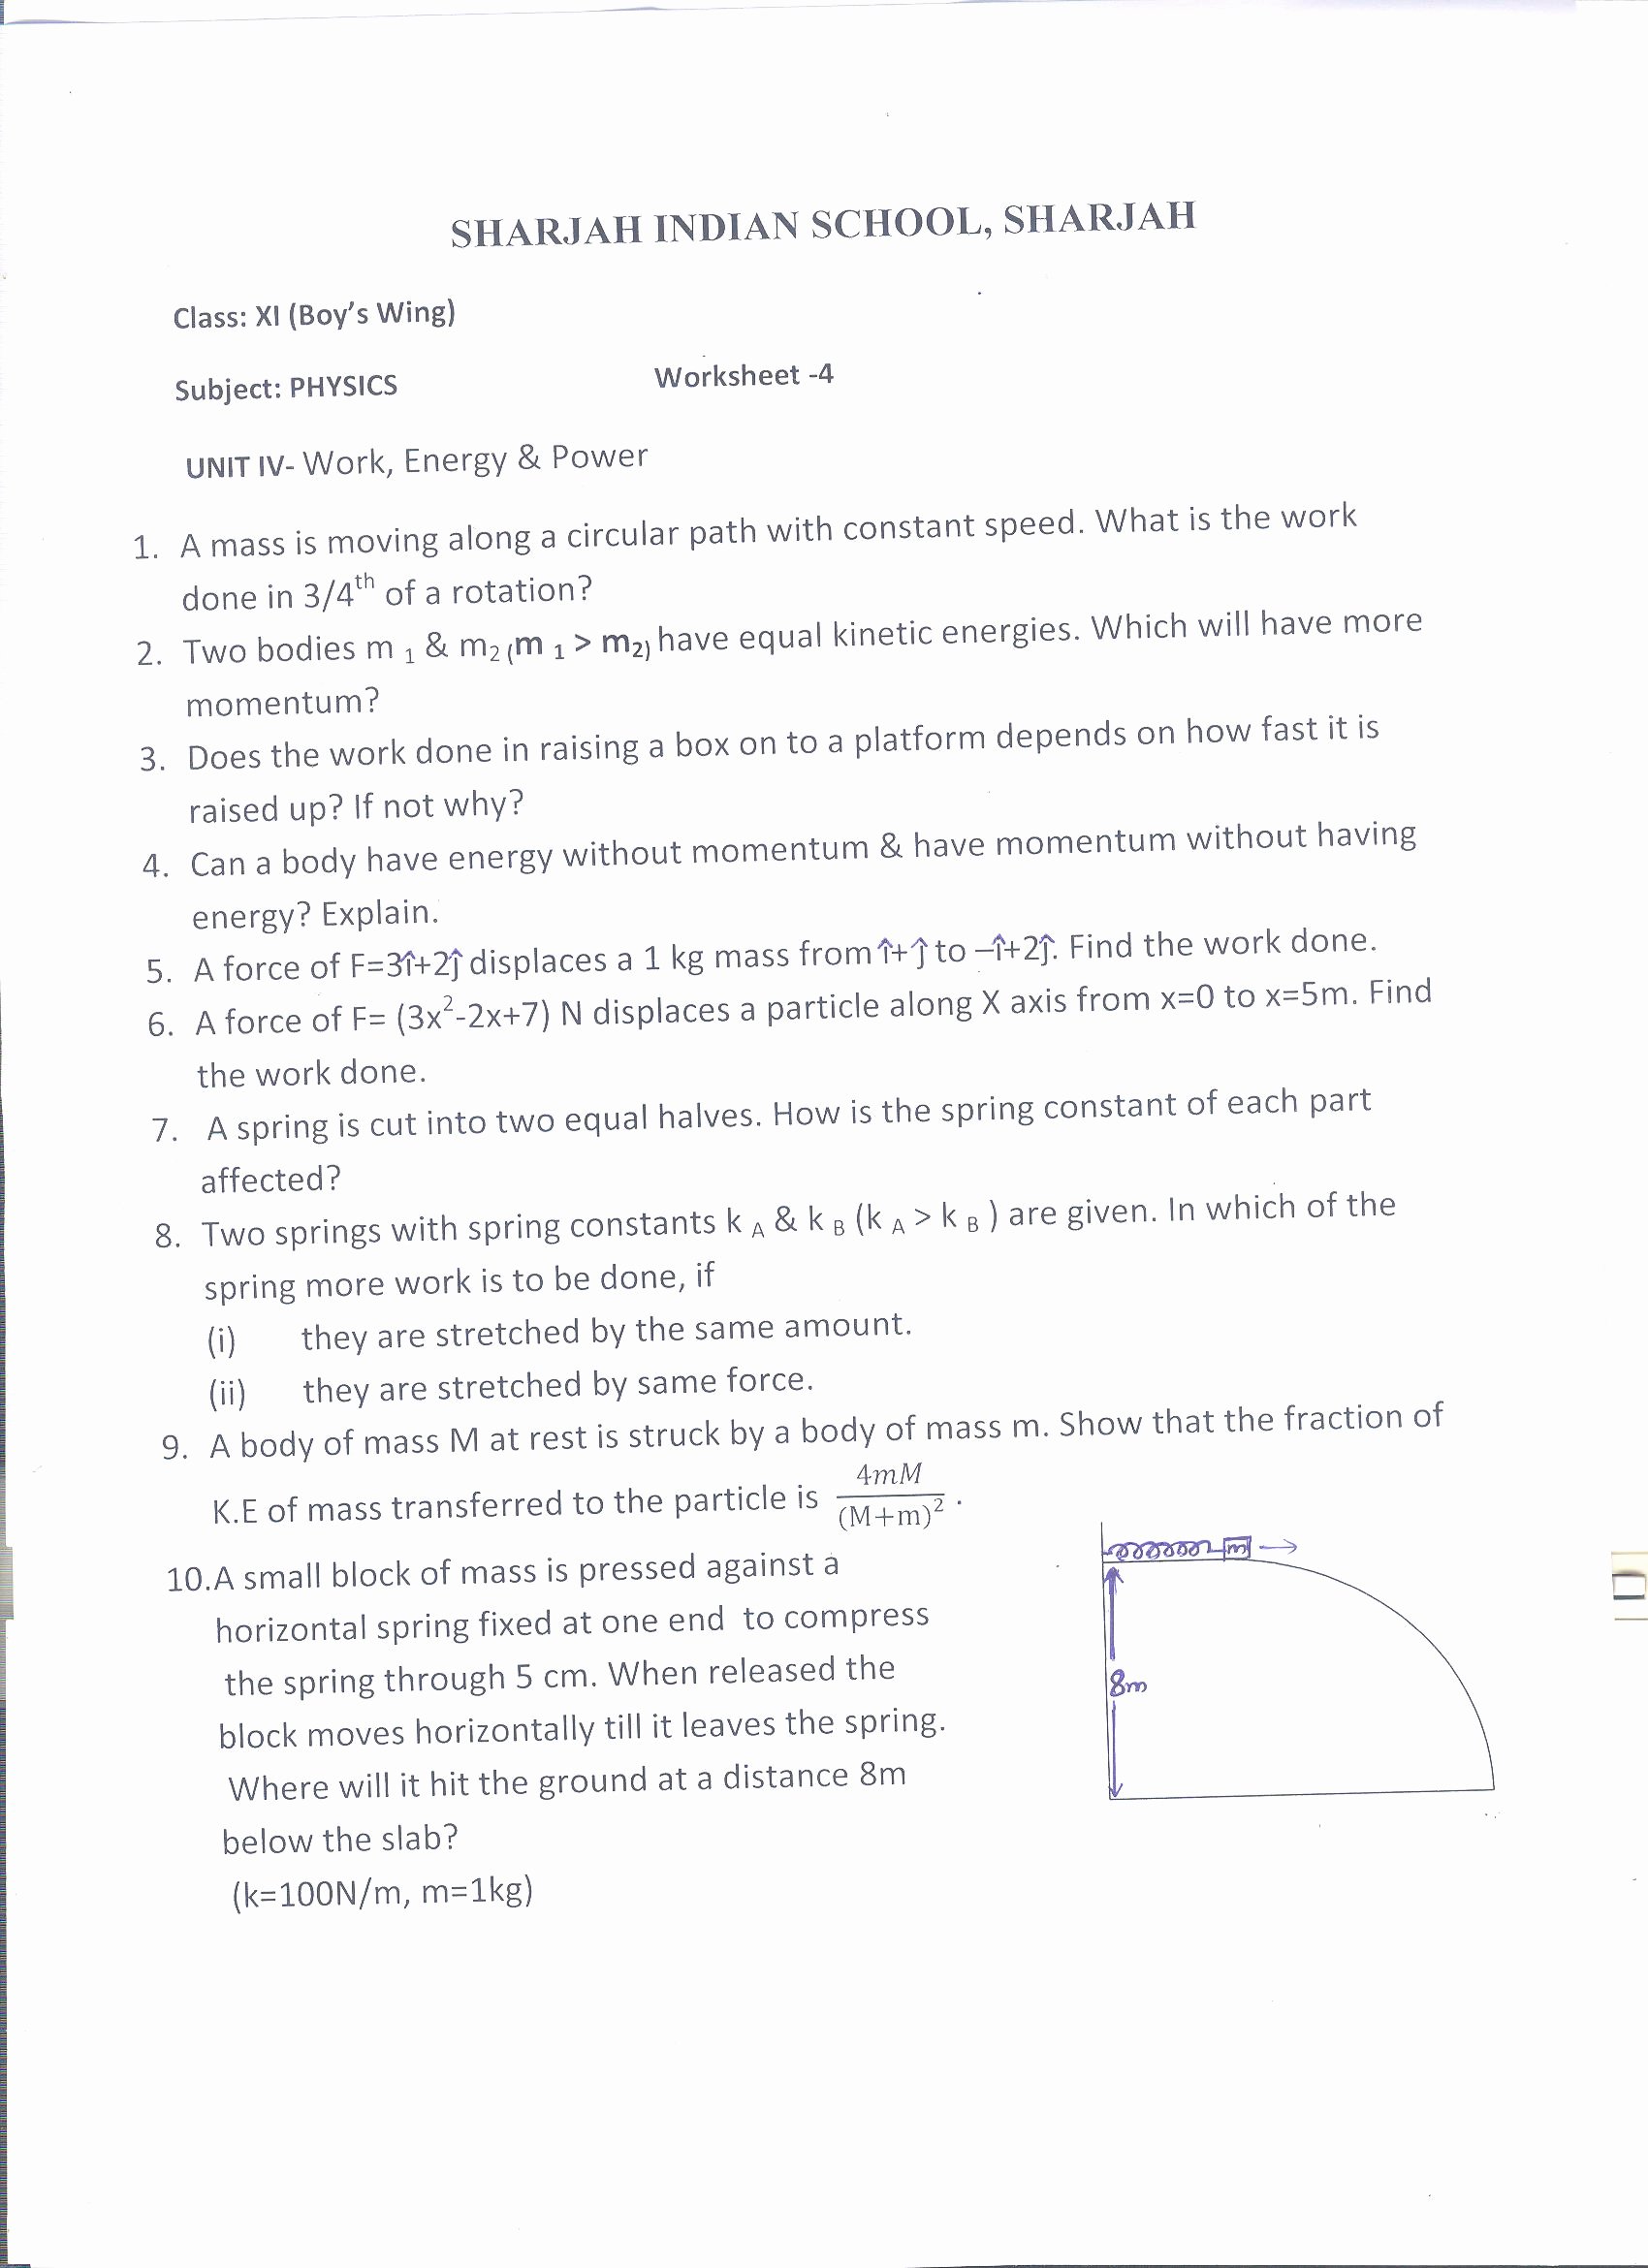 Work Energy and Power Worksheet New Worksheets Sharjah Indian School 39 Years Of Excellence